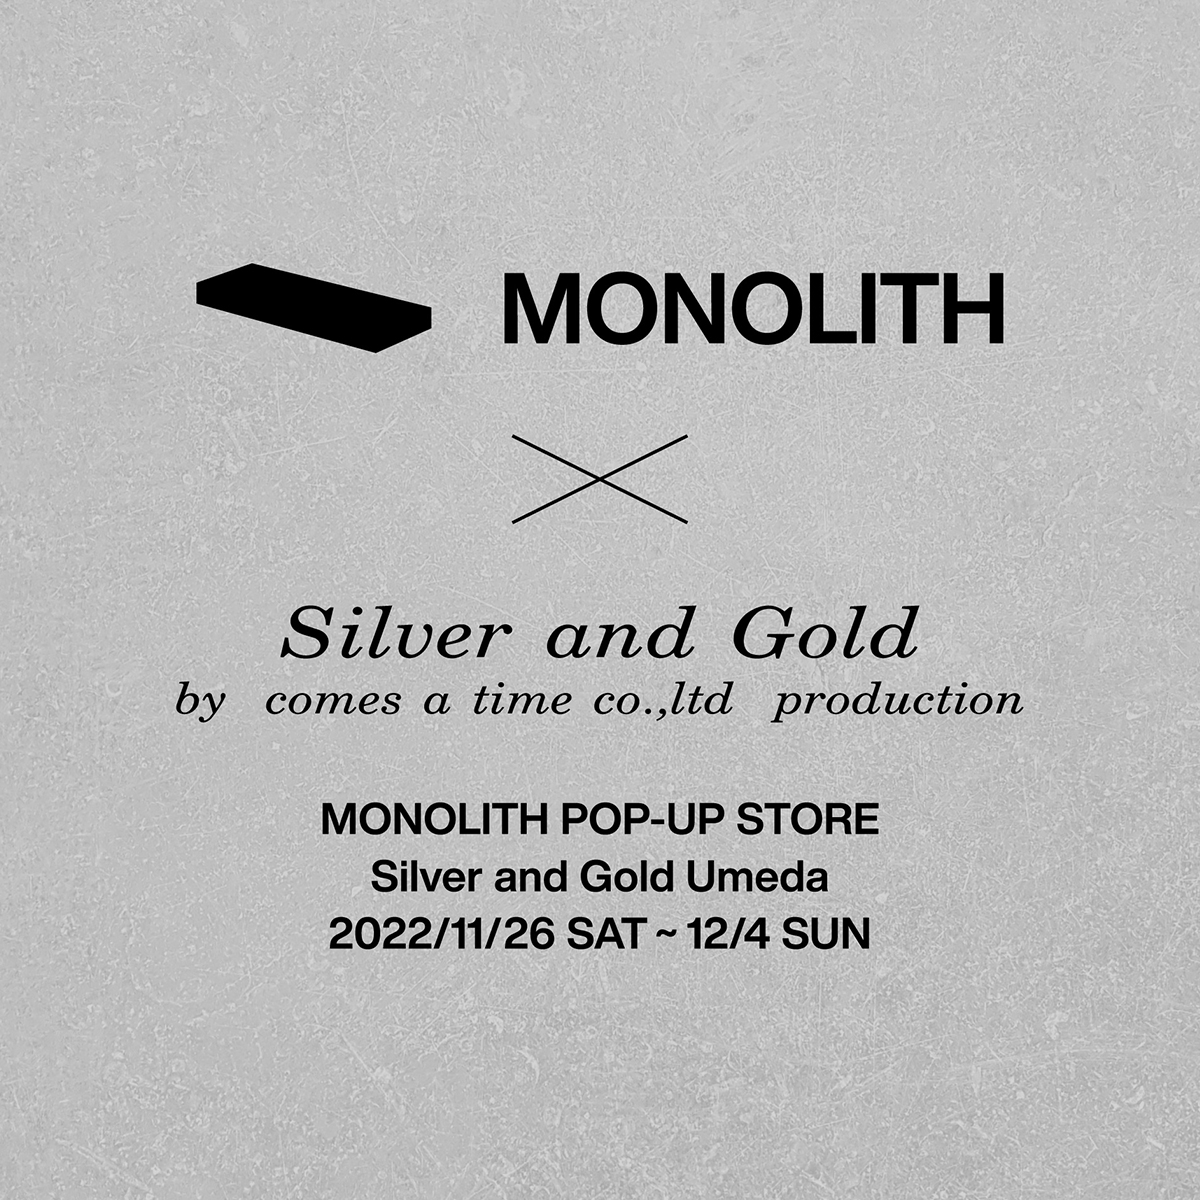 MONOLITH POP-UP STORE in Silver and Gold UMEDA